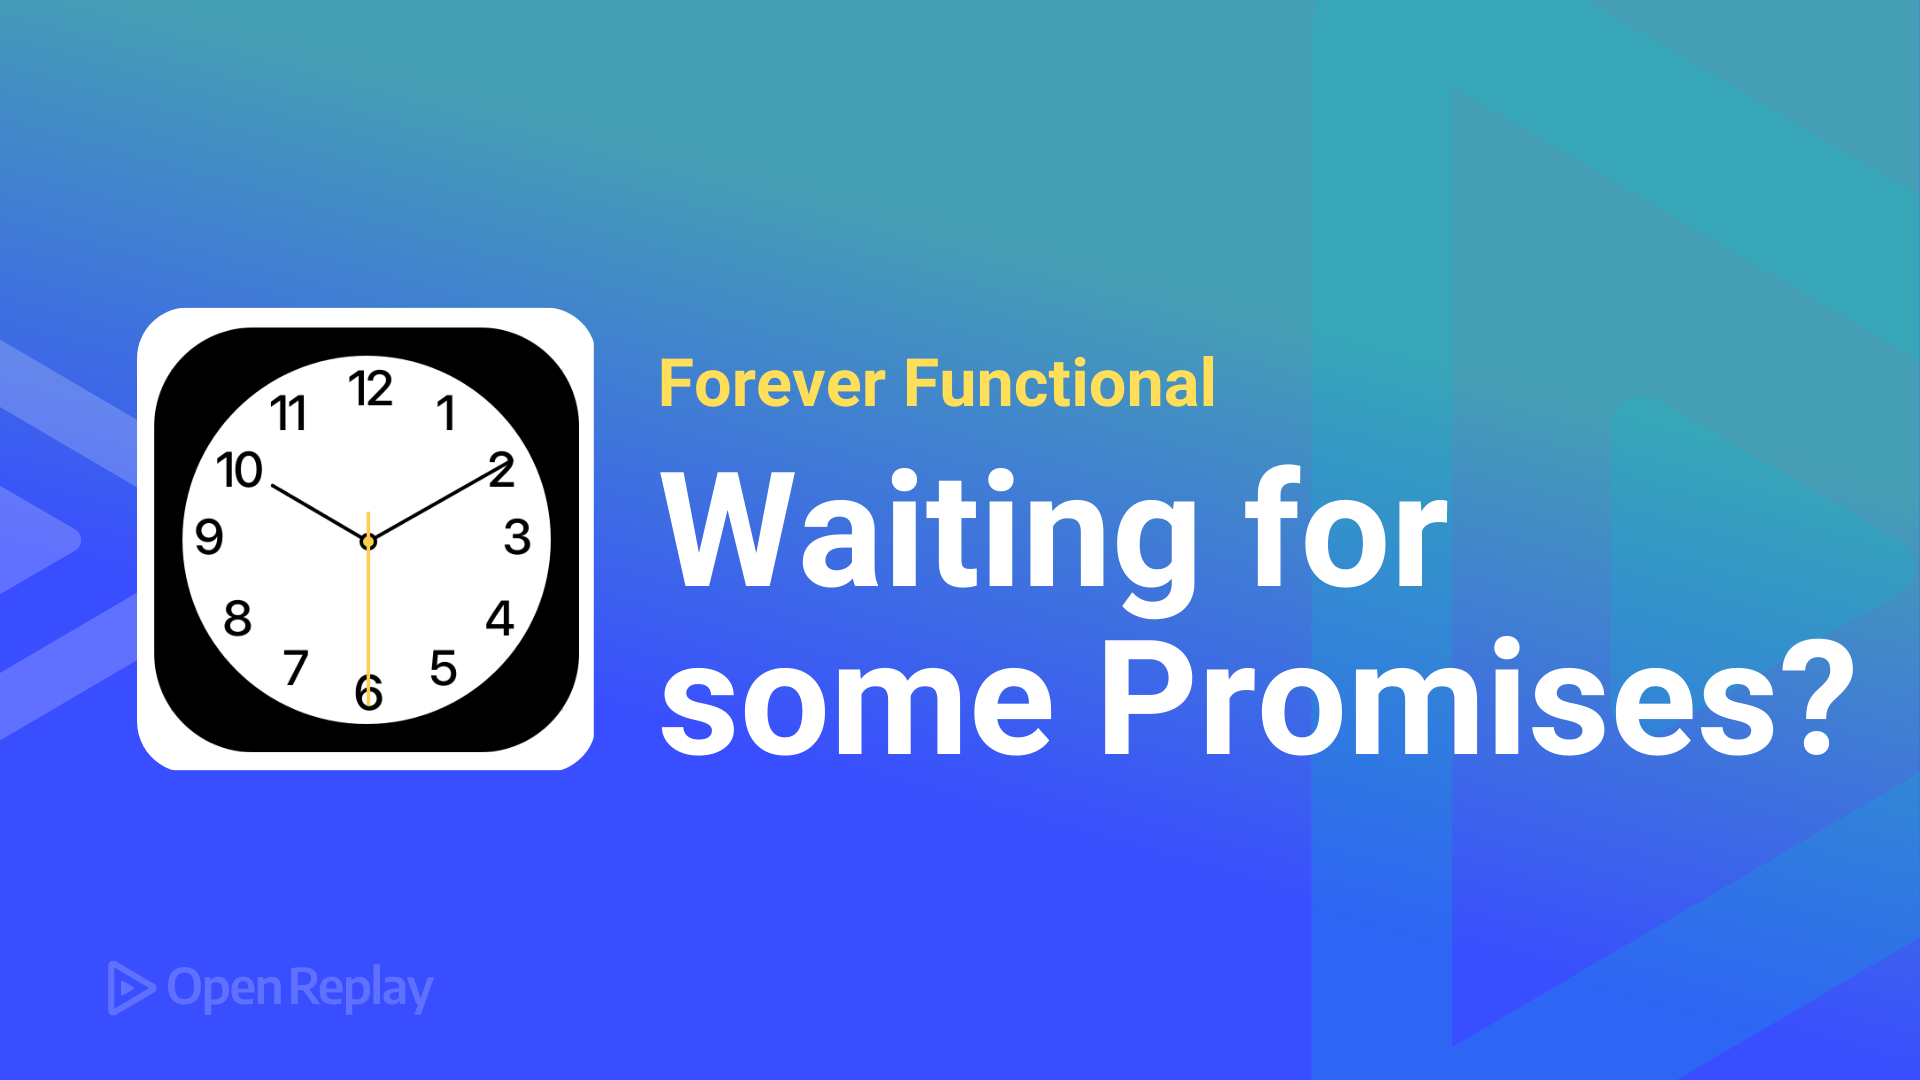 Forever Functional: Waiting for some promises?